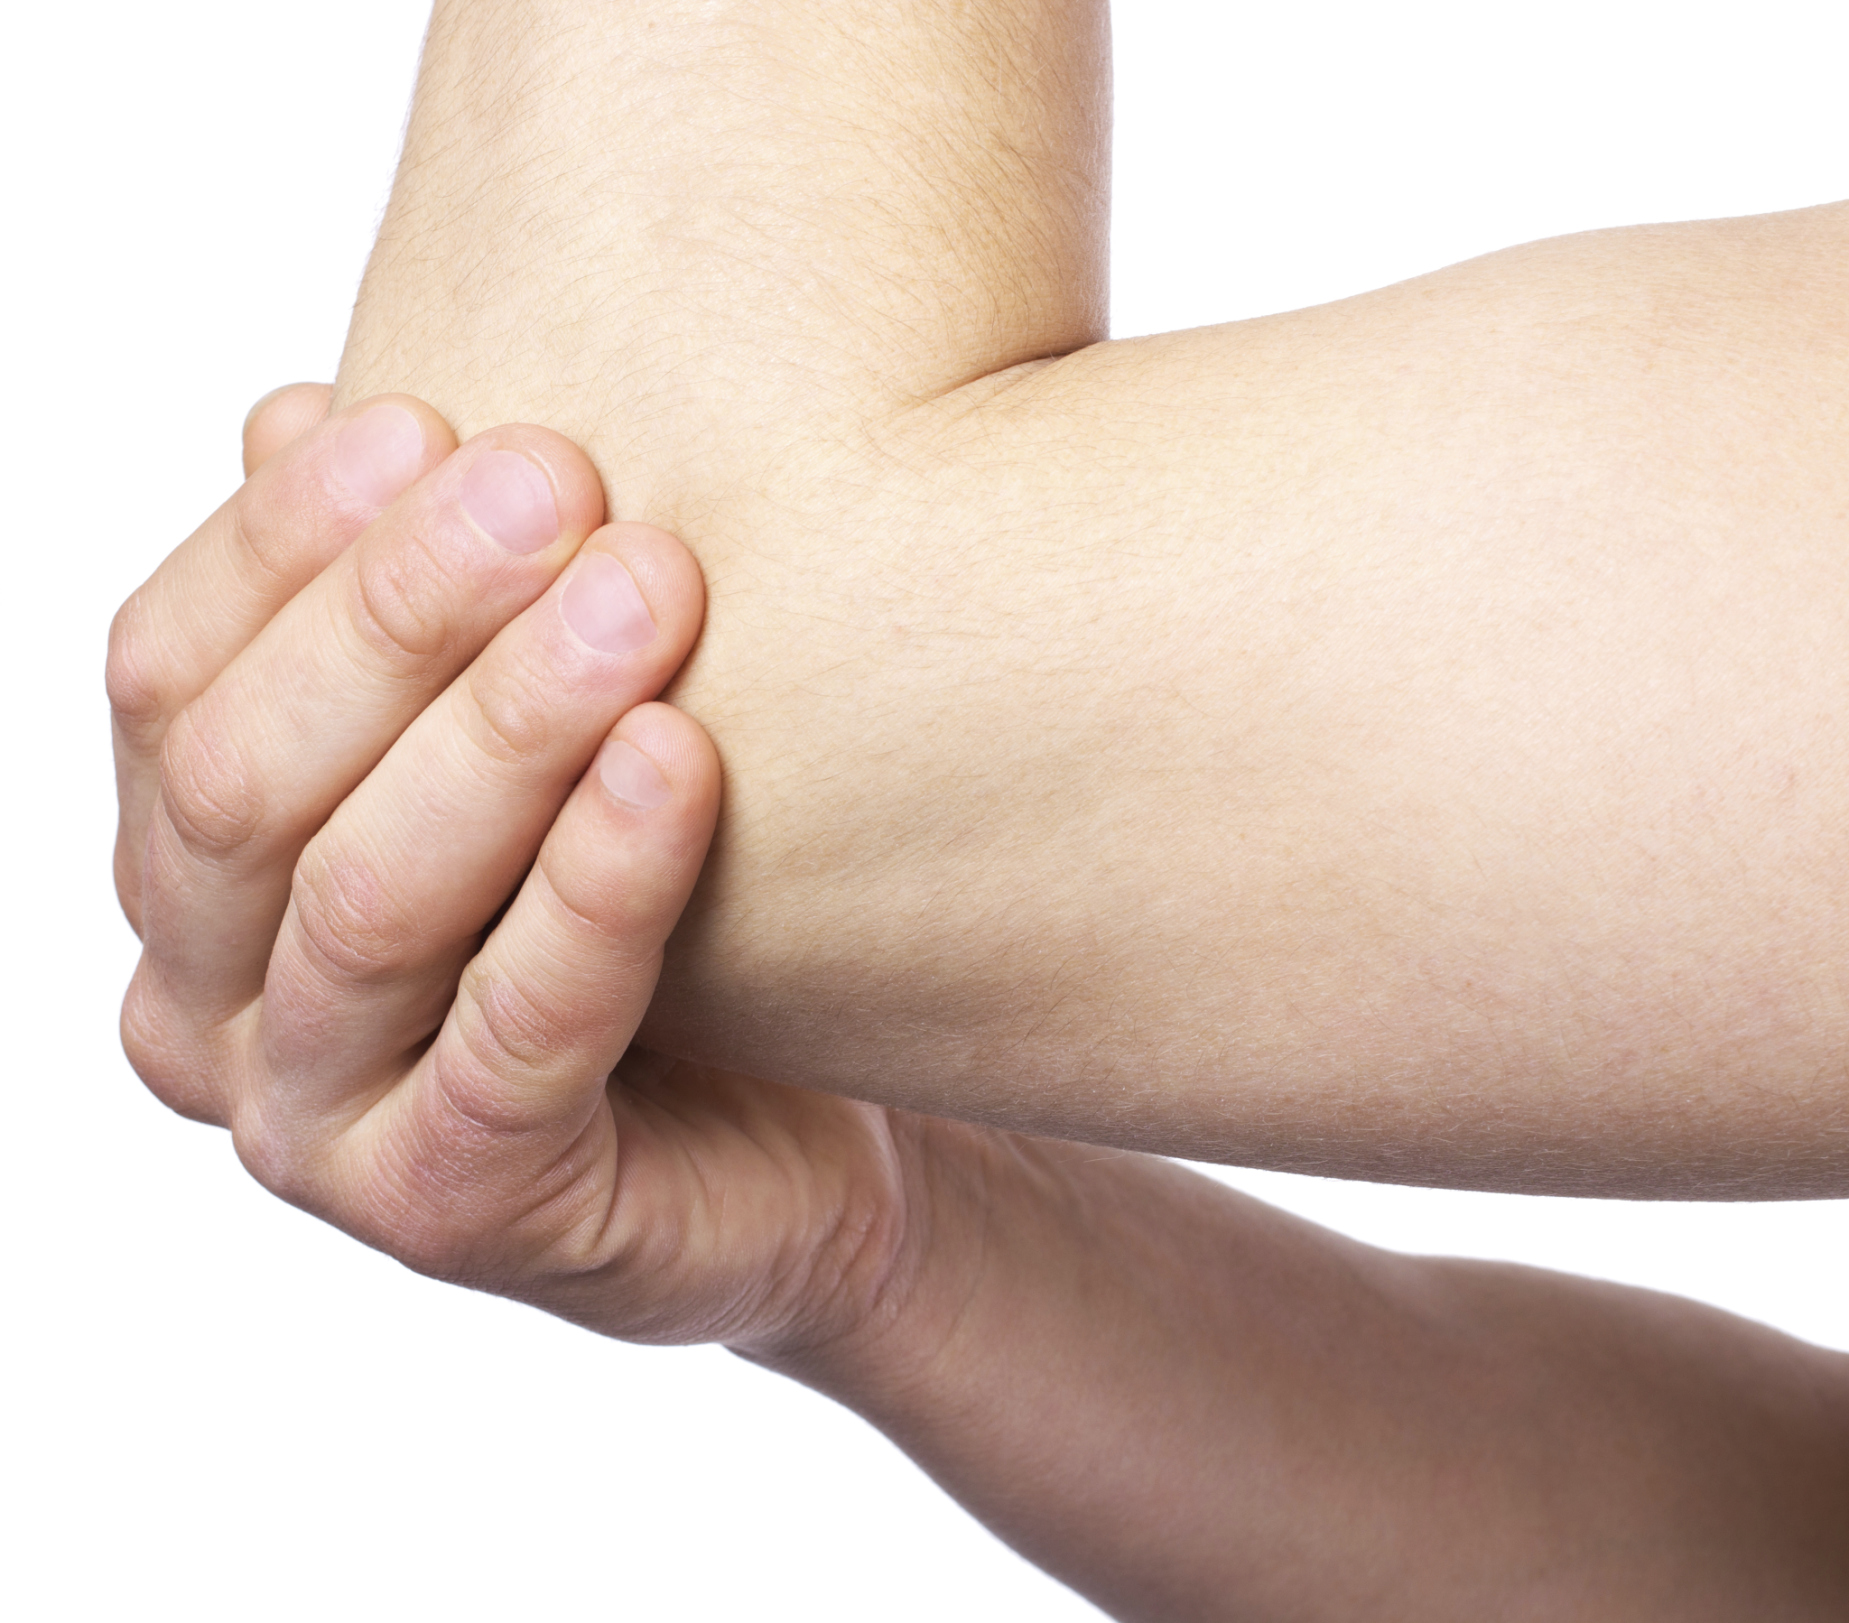 Hand holding an injured elbow